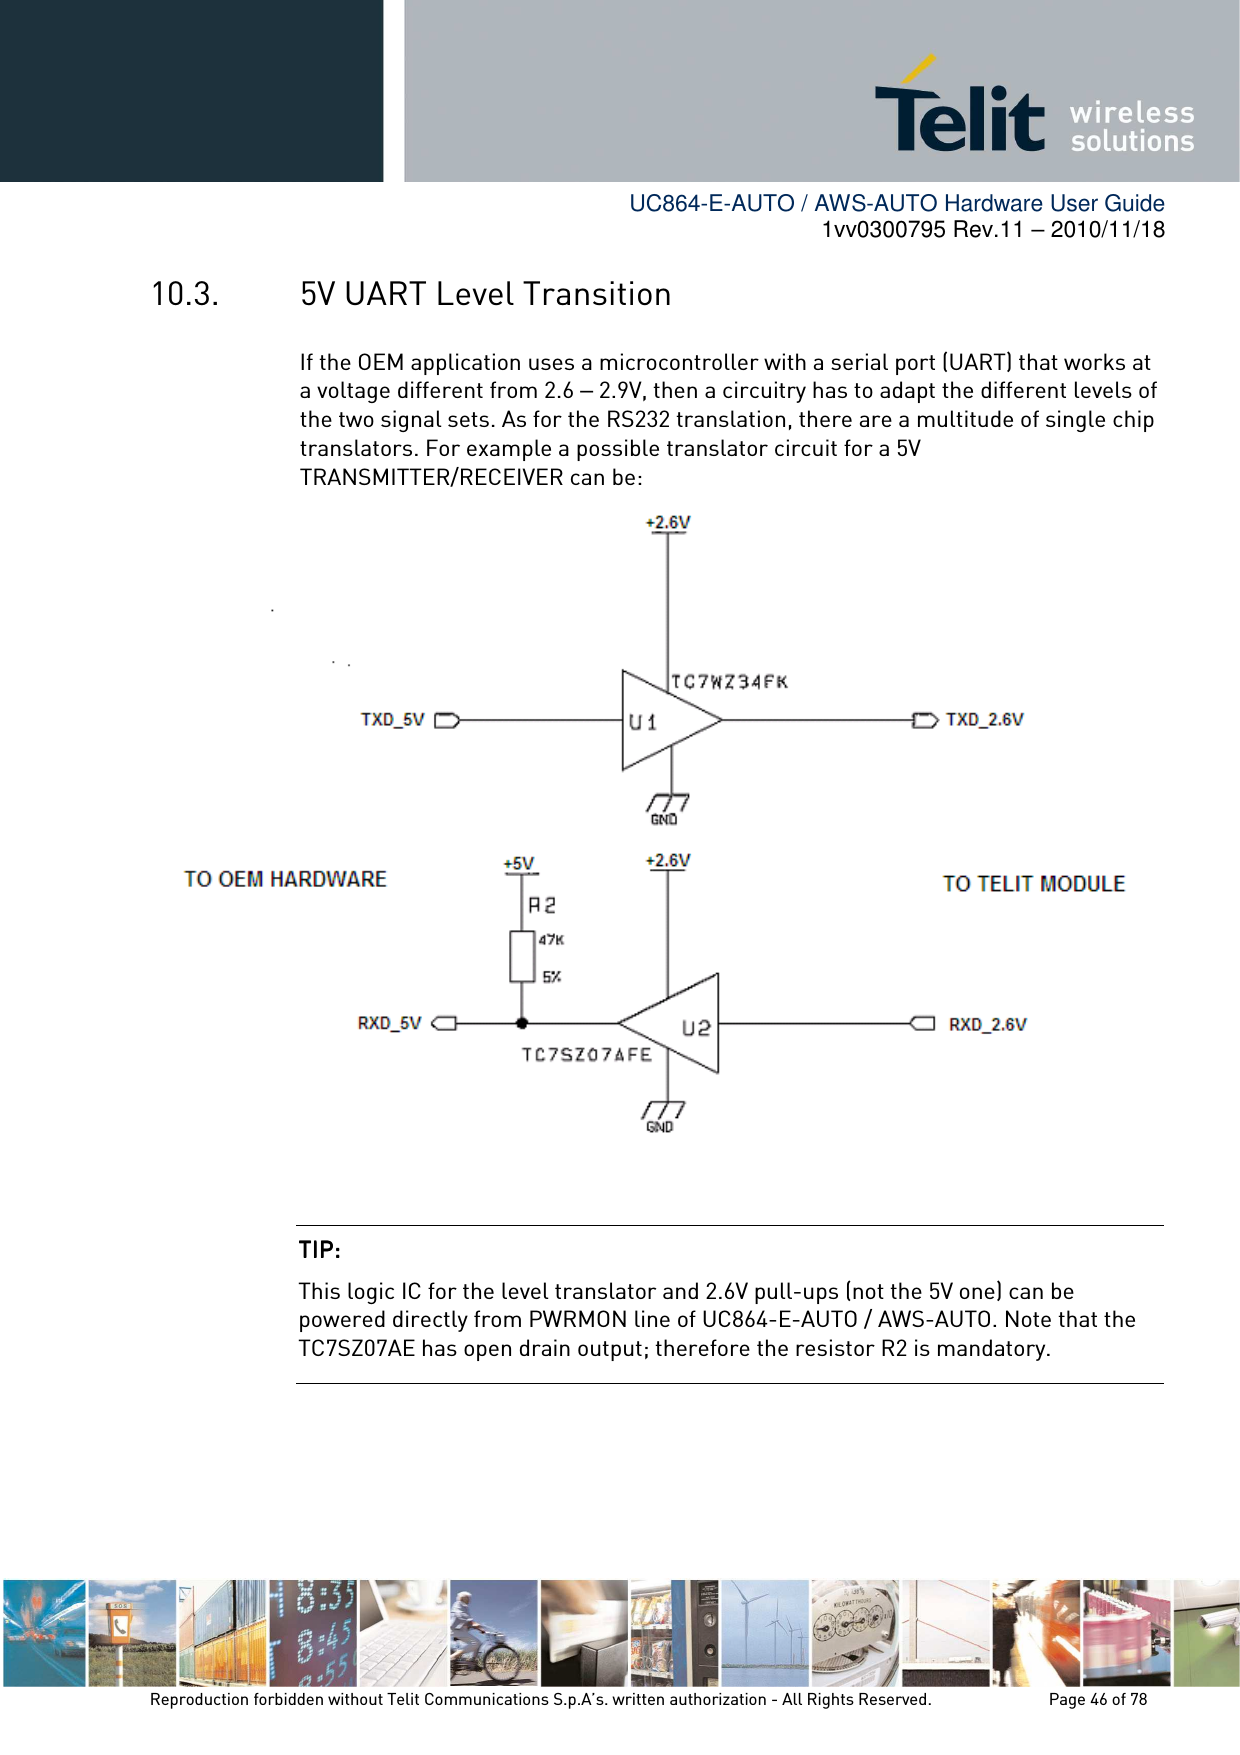        UC864-E-AUTO / AWS-AUTO Hardware User Guide 1vv0300795 Rev.11 – 2010/11/18     Reproduction forbidden without Telit Communications S.p.A’s. written authorization - All Rights Reserved.    Page 46 of 78  10.3. 5V UART Level Transition If the OEM application uses a microcontroller with a serial port (UART) that works at a voltage different from 2.6 – 2.9V, then a circuitry has to adapt the different levels of the two signal sets. As for the RS232 translation, there are a multitude of single chip translators. For example a possible translator circuit for a 5V TRANSMITTER/RECEIVER can be:      TIP: TIP: TIP: TIP:     This logic IC for the level translator and 2.6V pull-ups (not the 5V one) can be powered directly from PWRMON line of UC864-E-AUTO / AWS-AUTO. Note that the TC7SZ07AE has open drain output; therefore the resistor R2 is mandatory. 